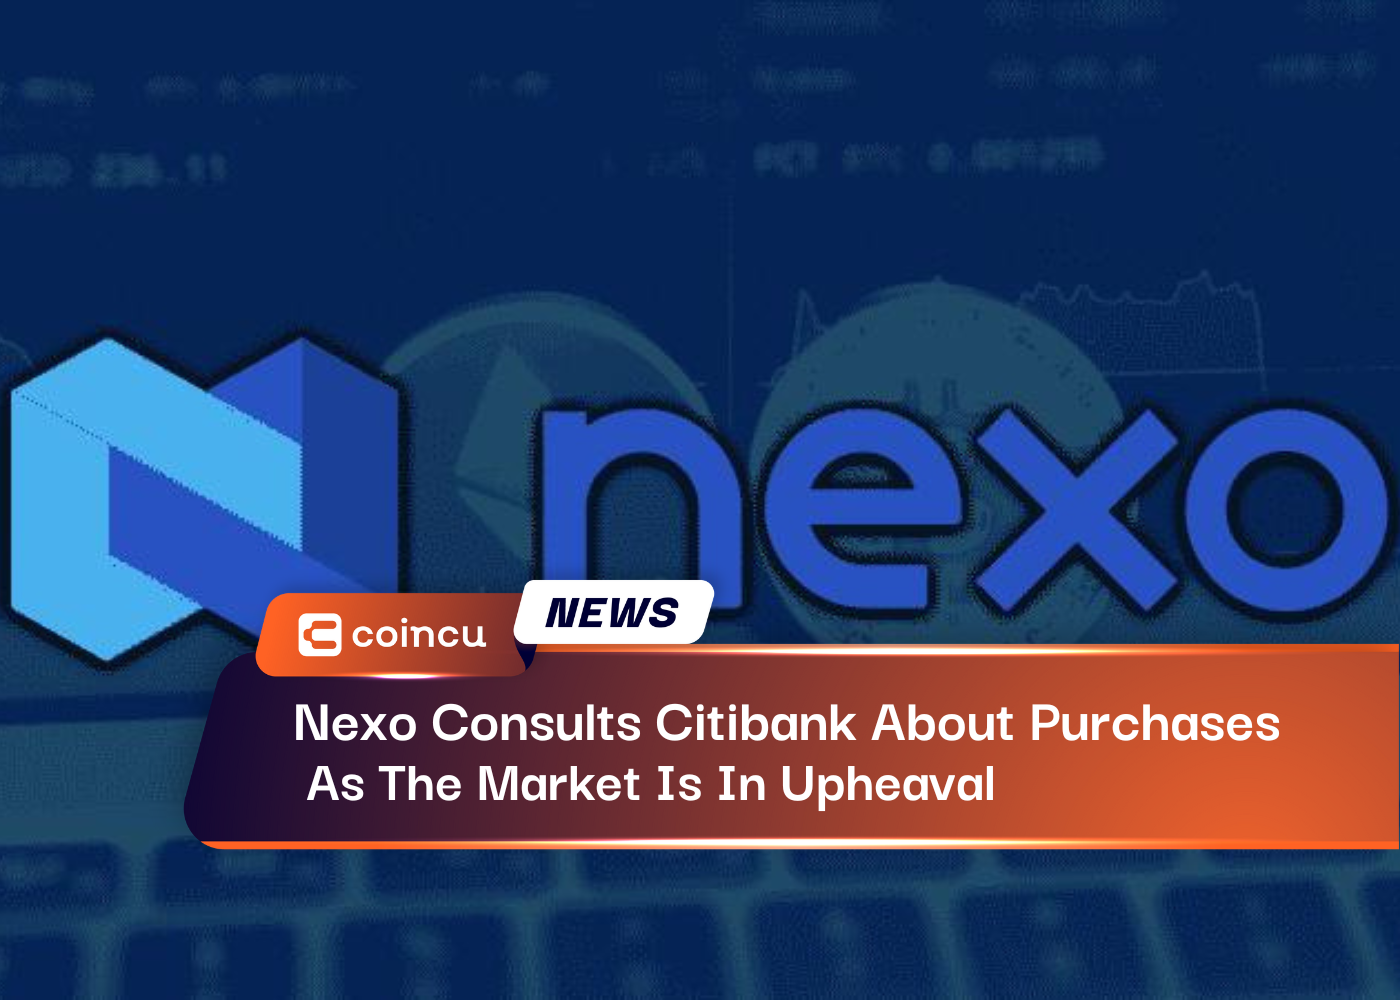 Nexo Consults Citibank About Purchases